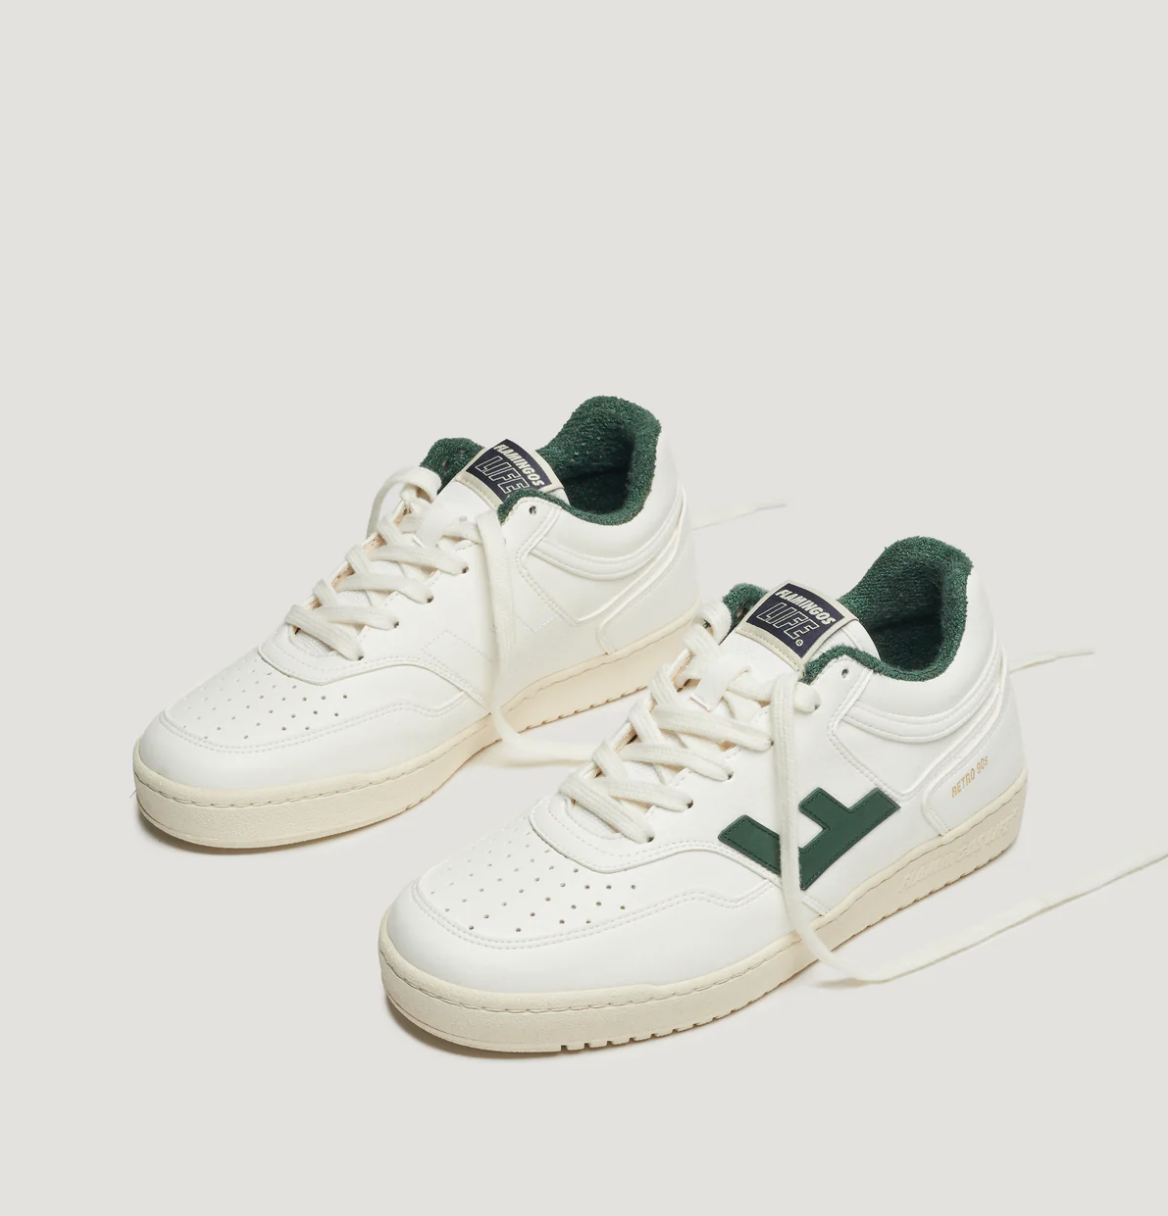 Retro 90s White Forest Trainers